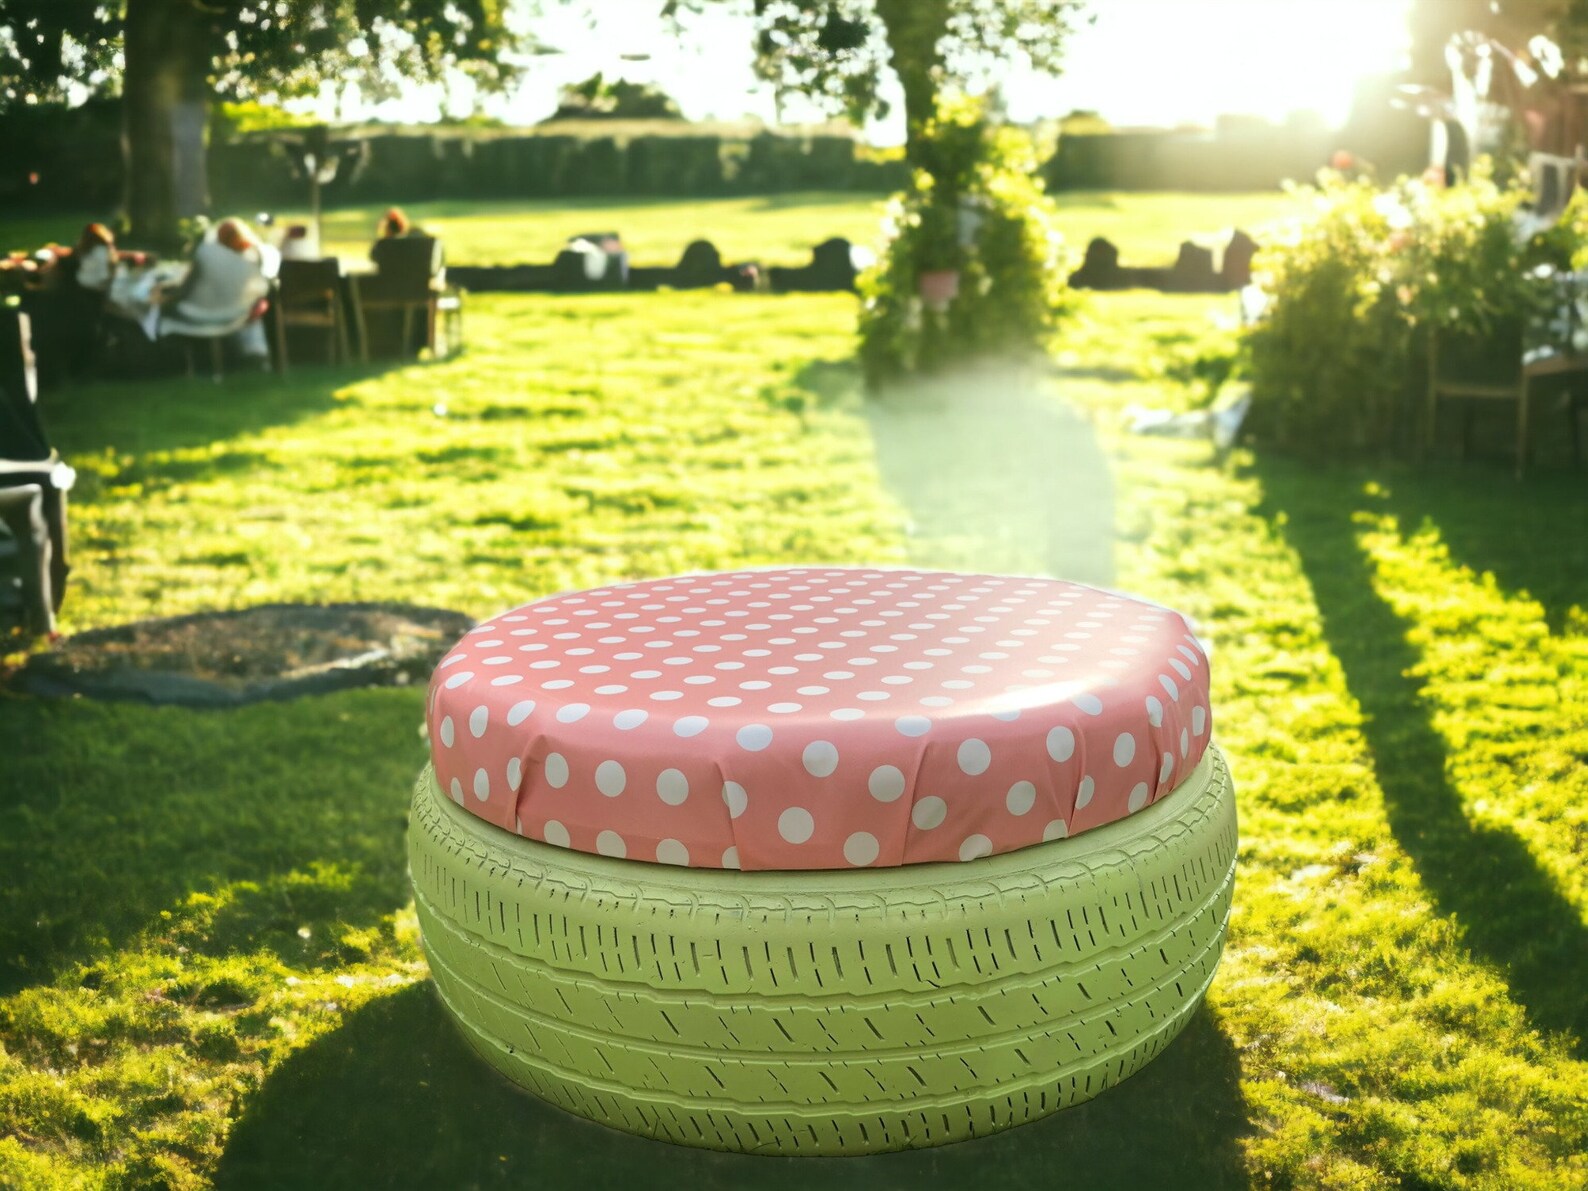 A stool made from an old tire painted green with pink polka dot upholstry on top, in a sunny backyard party.